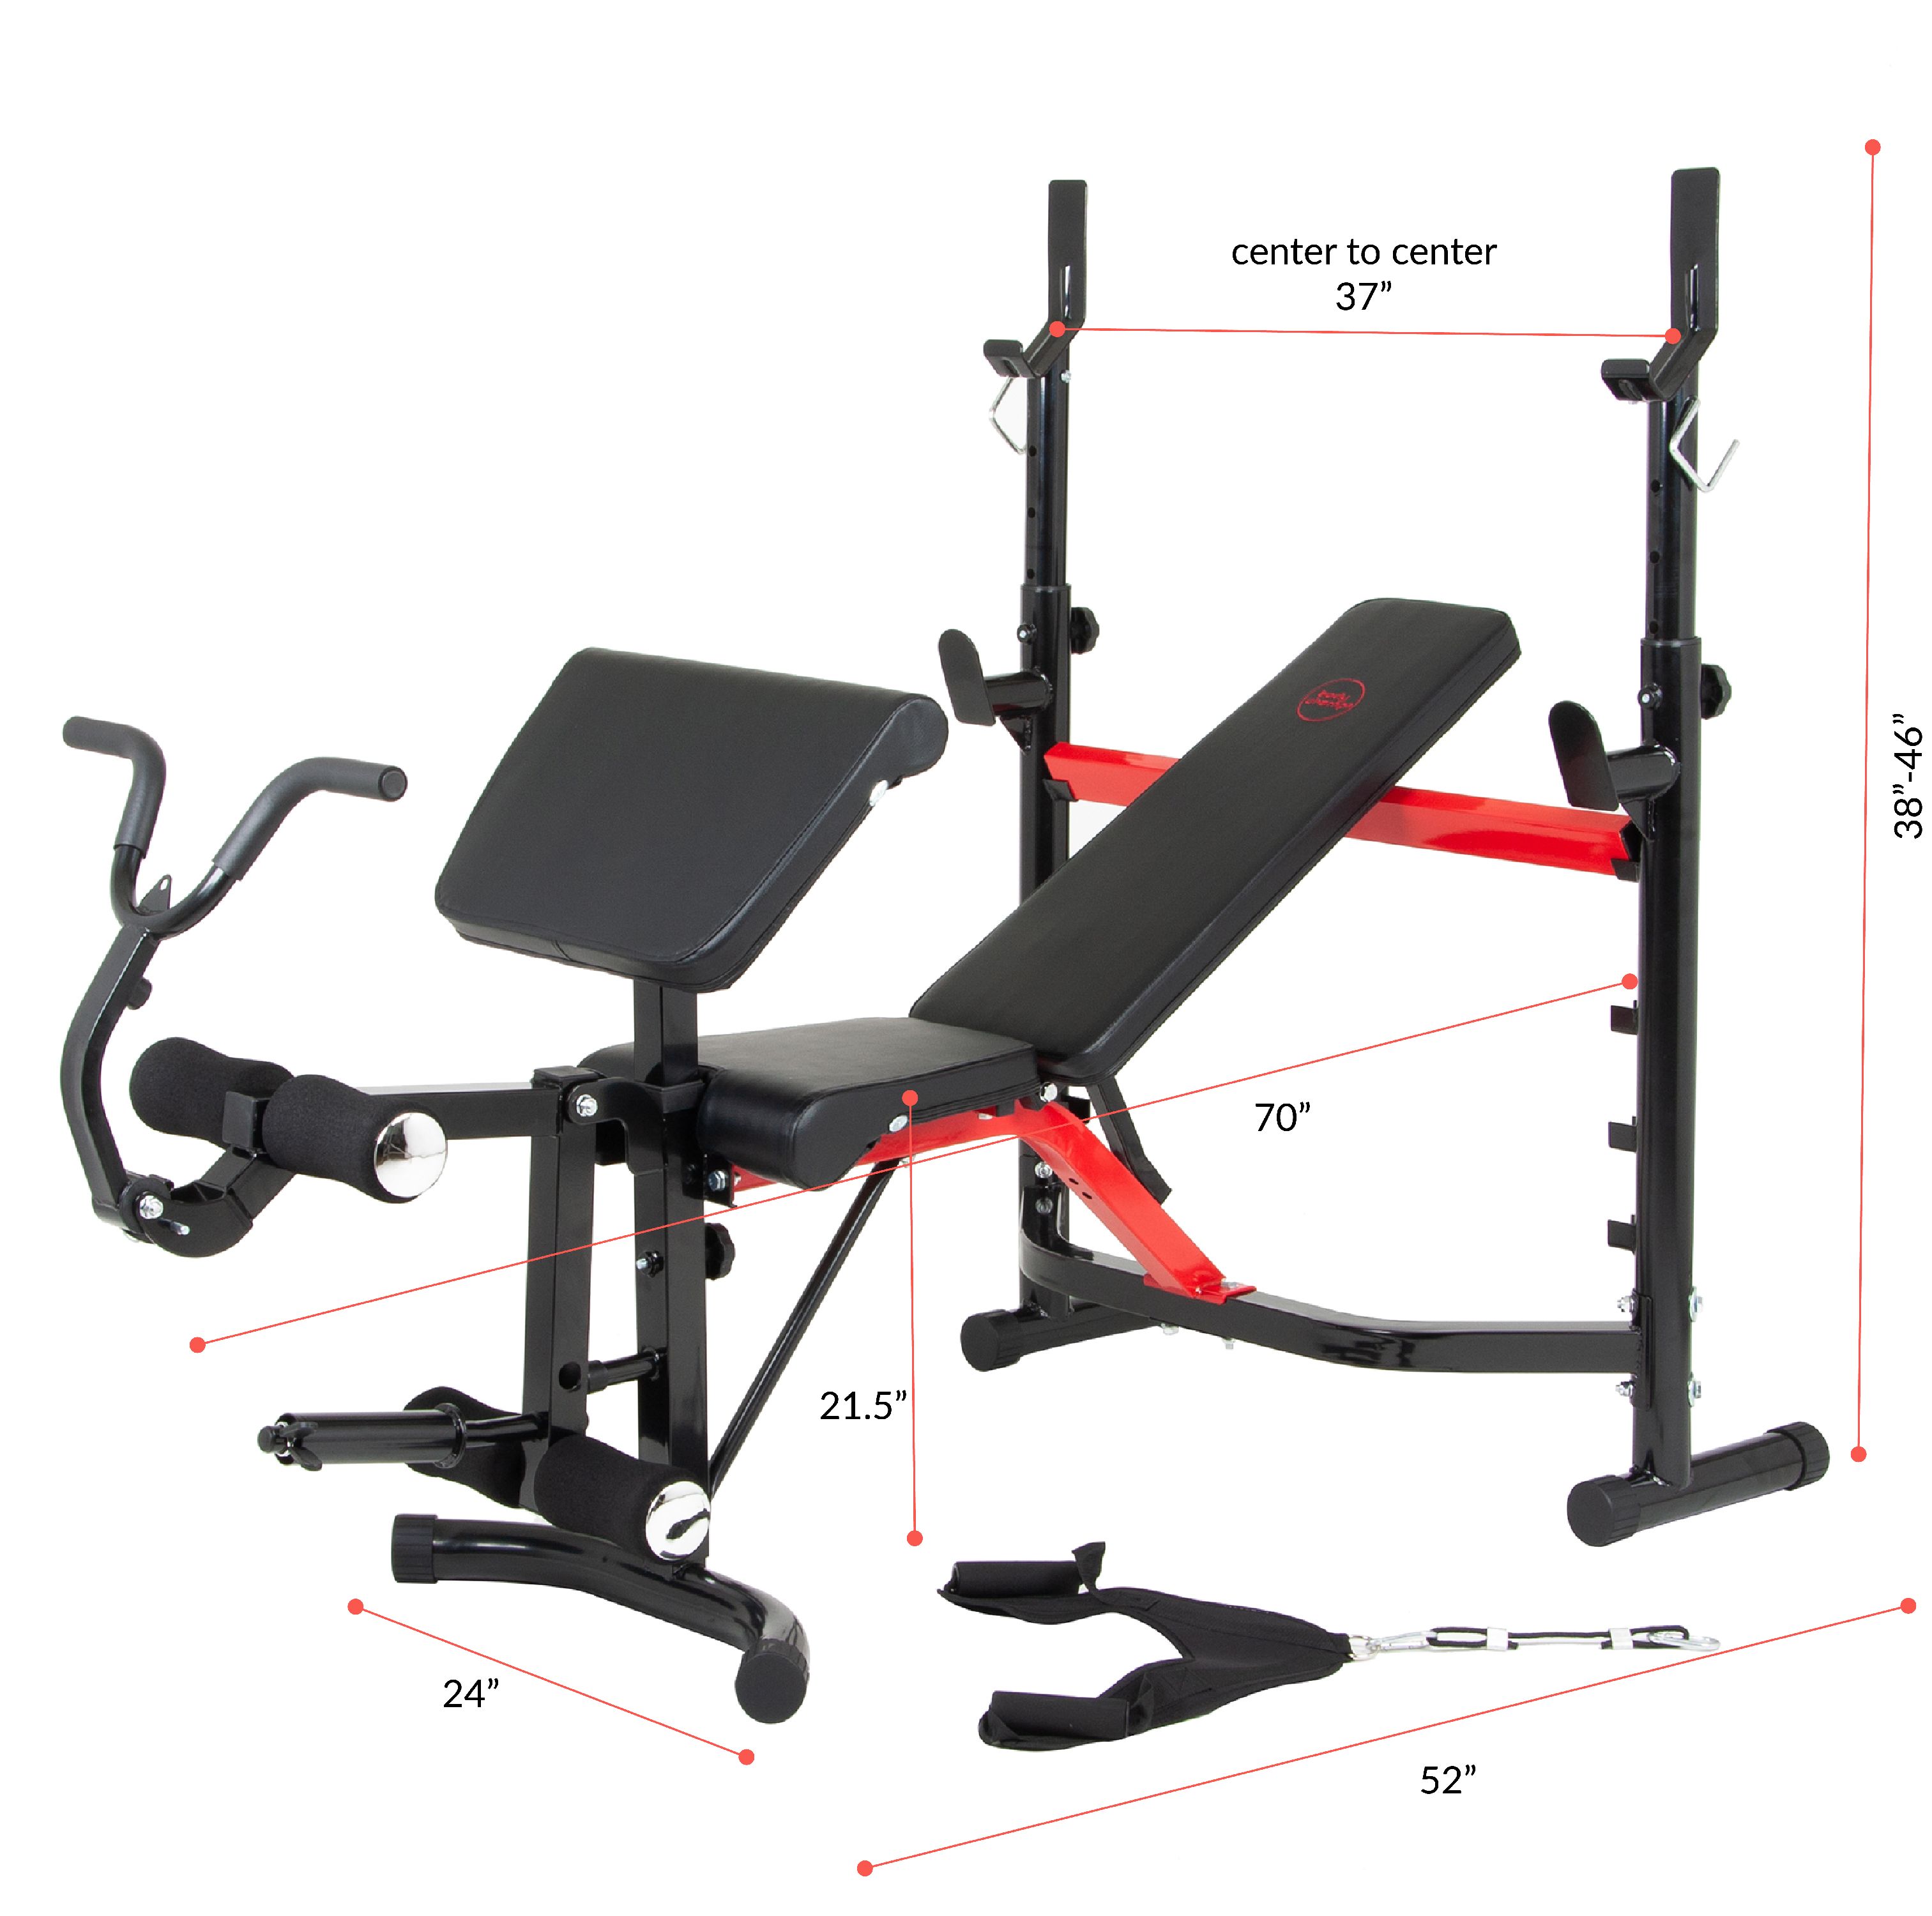 Body Champ BCB5268 Olympic Weight Bench with Arm Curl and Curl Bar Attachment, 300 Lbs. Weight Limit - image 4 of 10